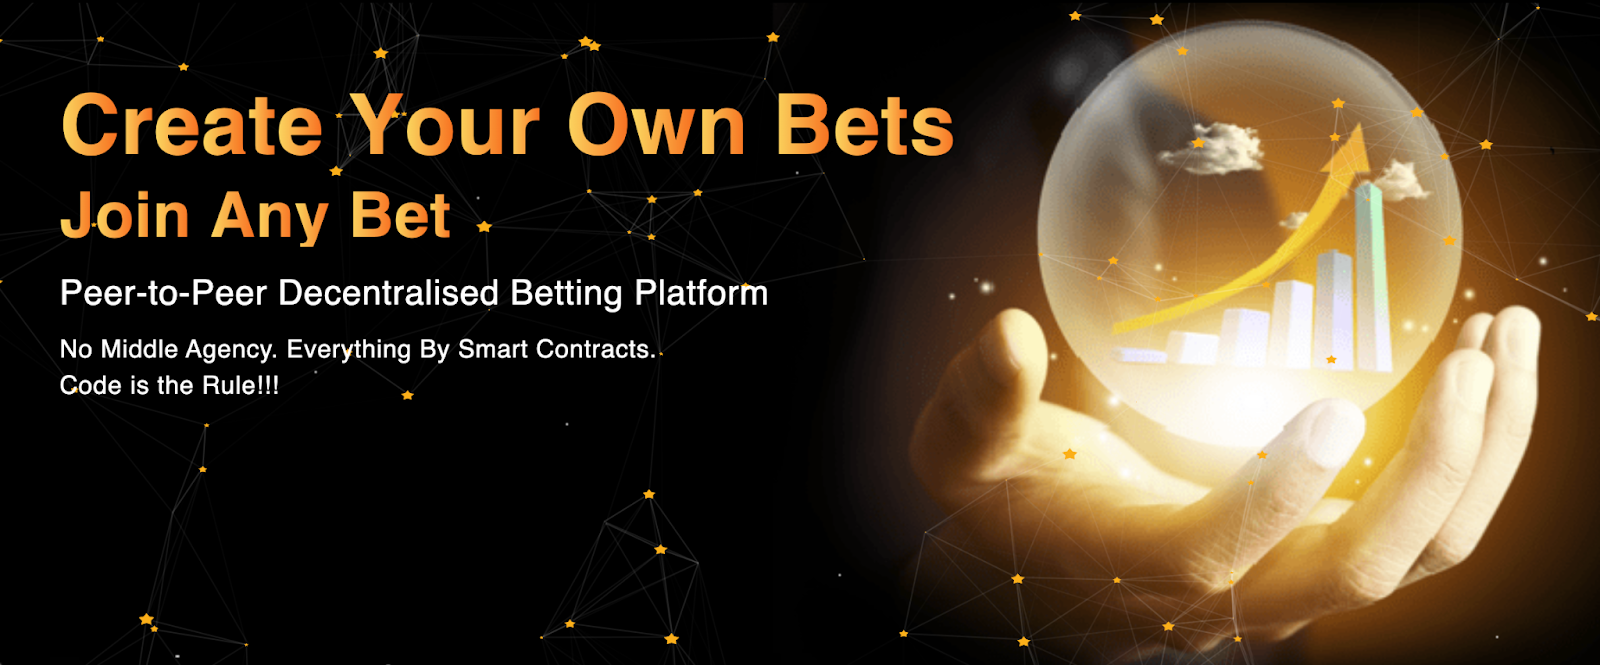 , Betaverse Launches a Fully Decentralized Peer-to-Peer Betting Platform